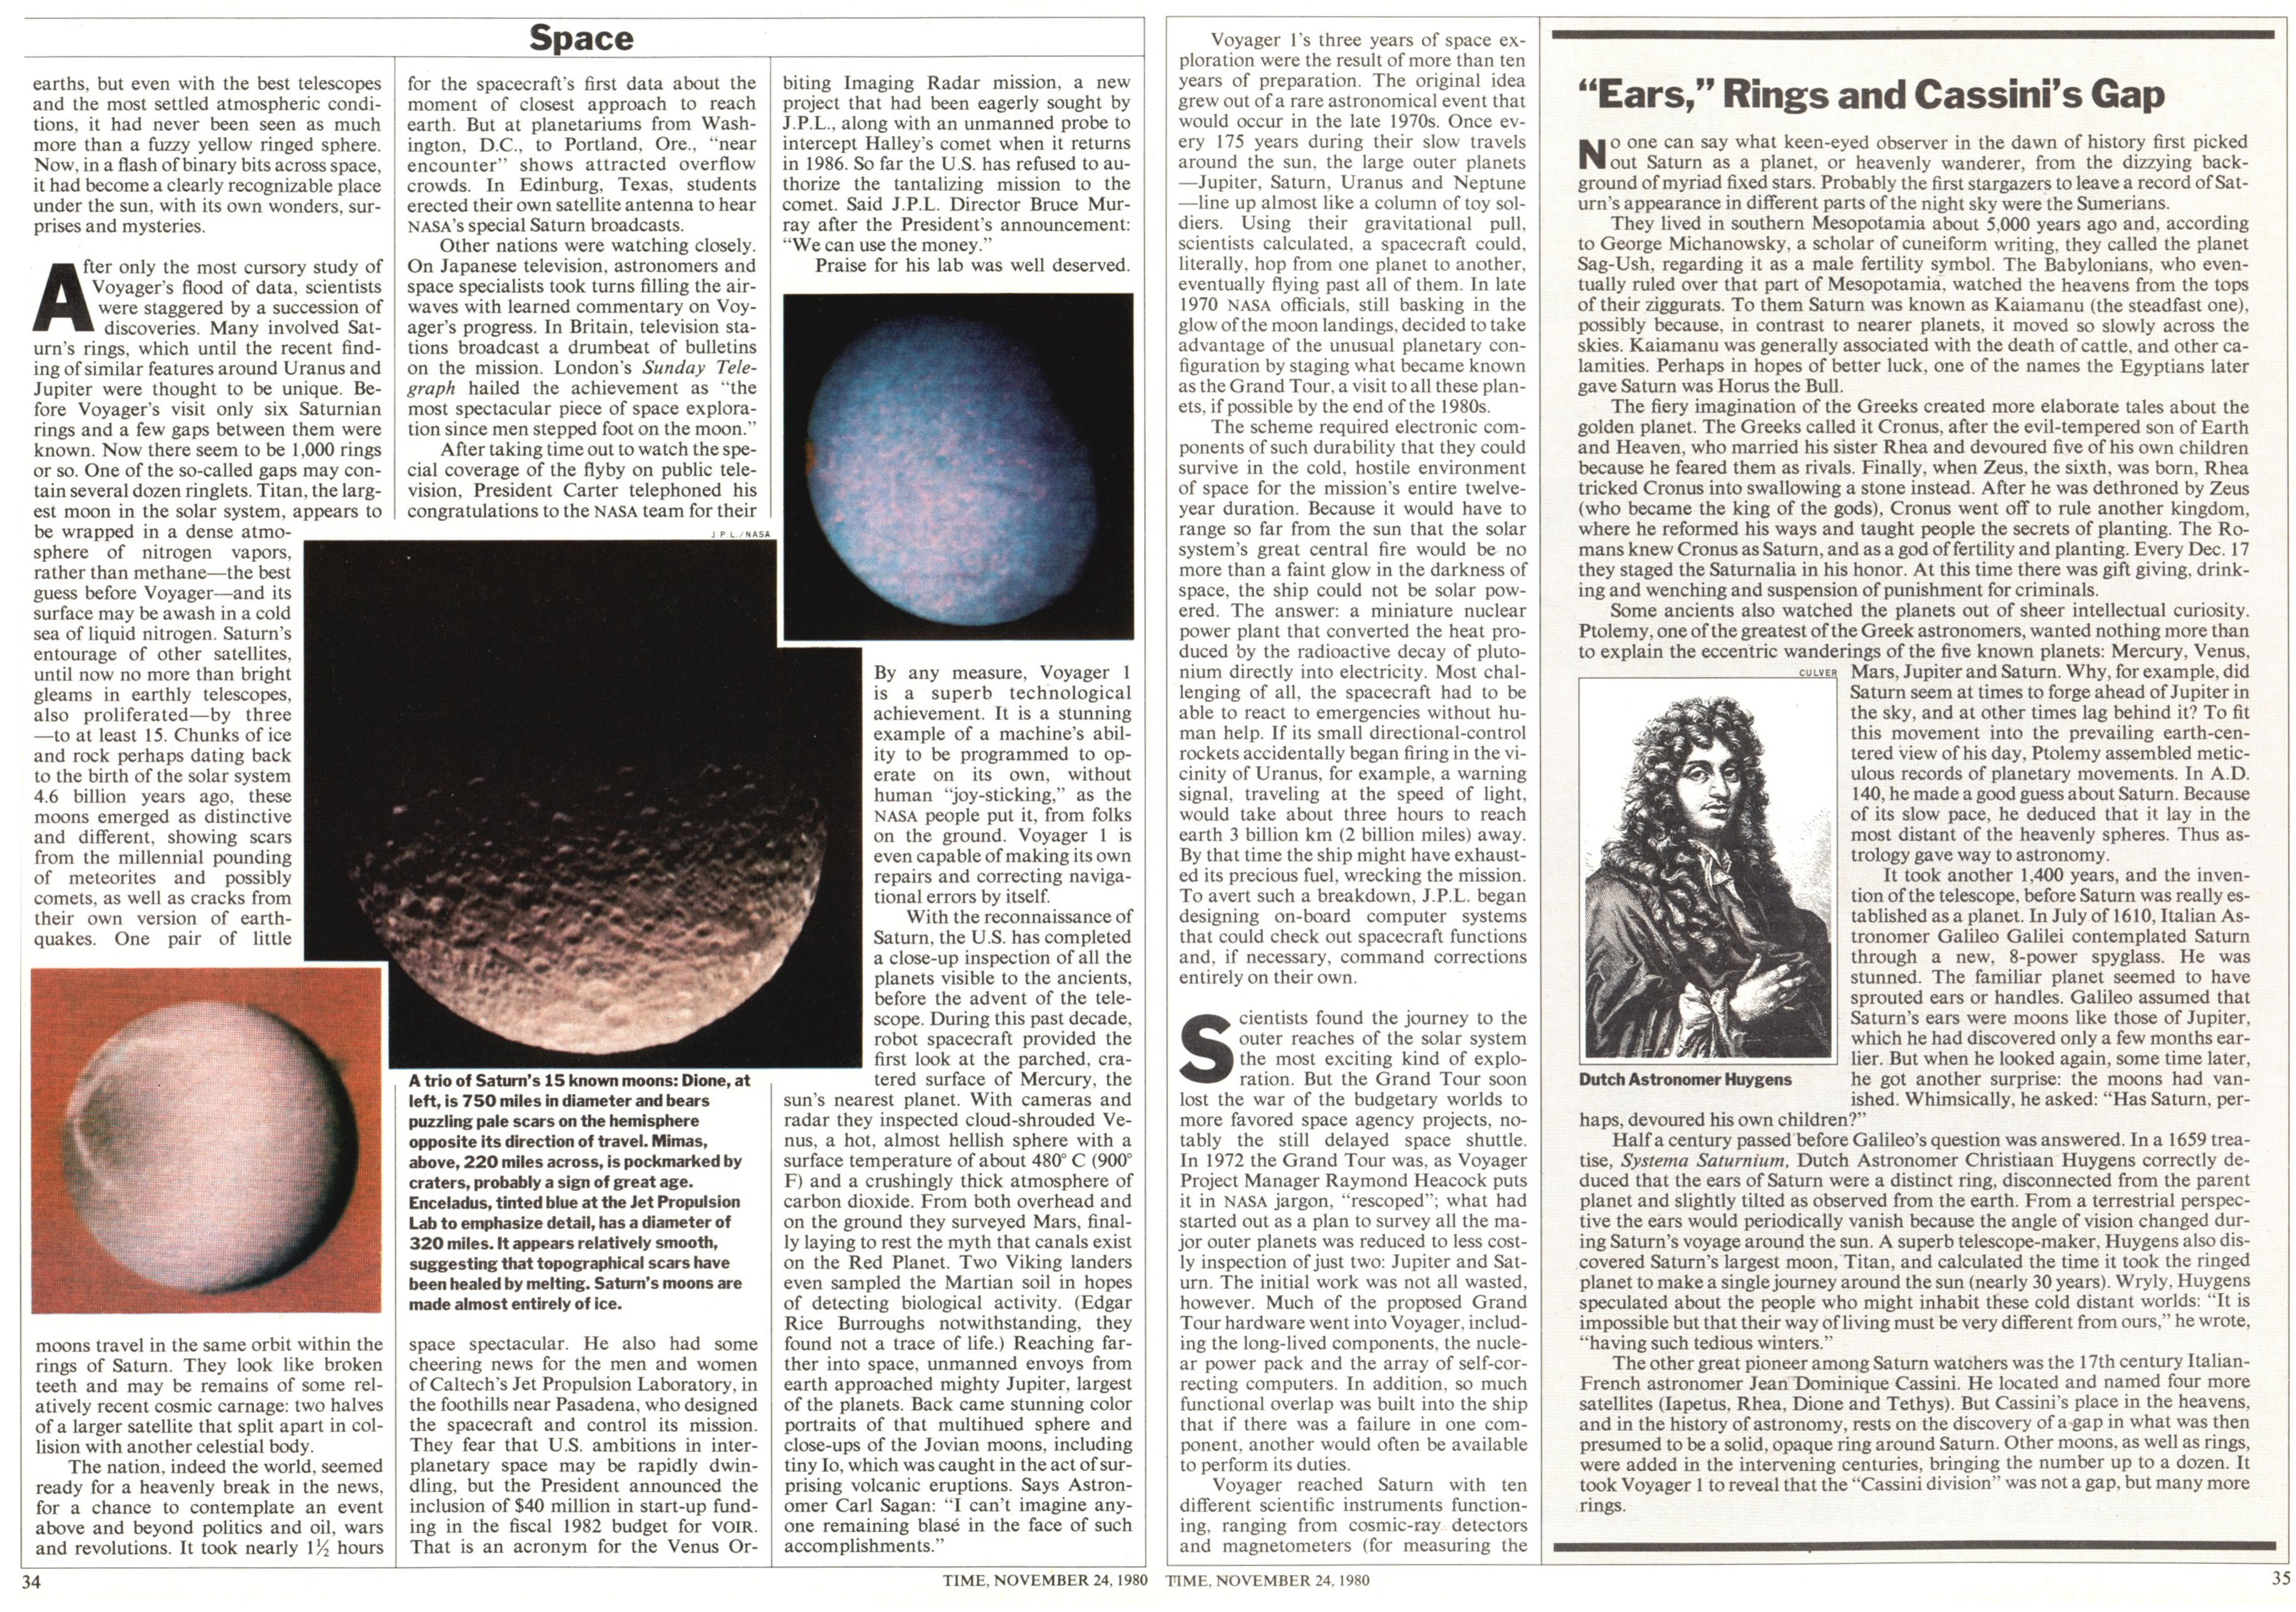 A spread from the Nov. 24, 1980, issue of TIME